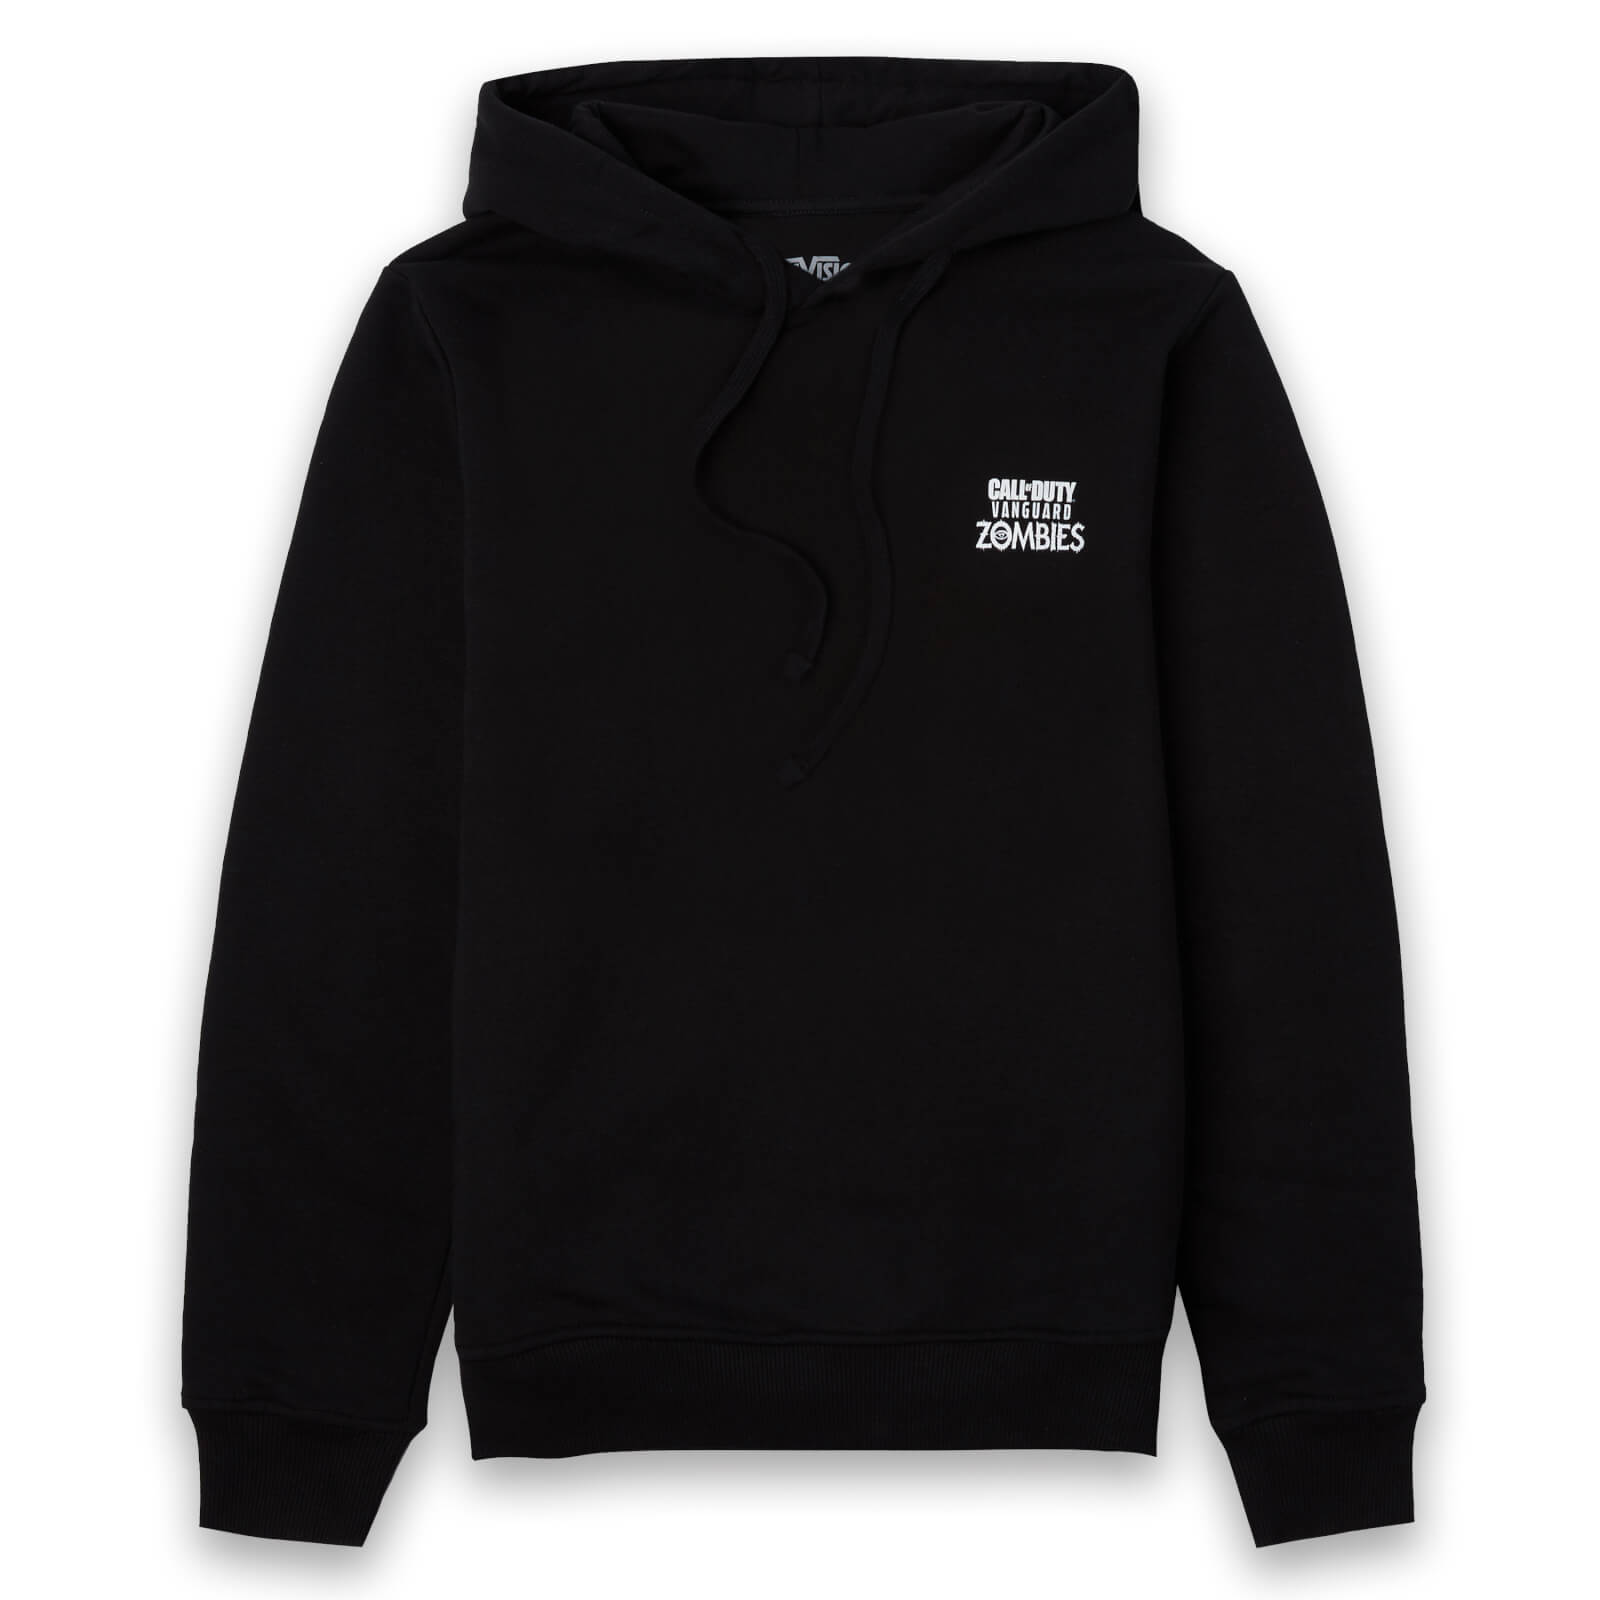 Call Of Duty Trenches Hoodie - Black - M - Black